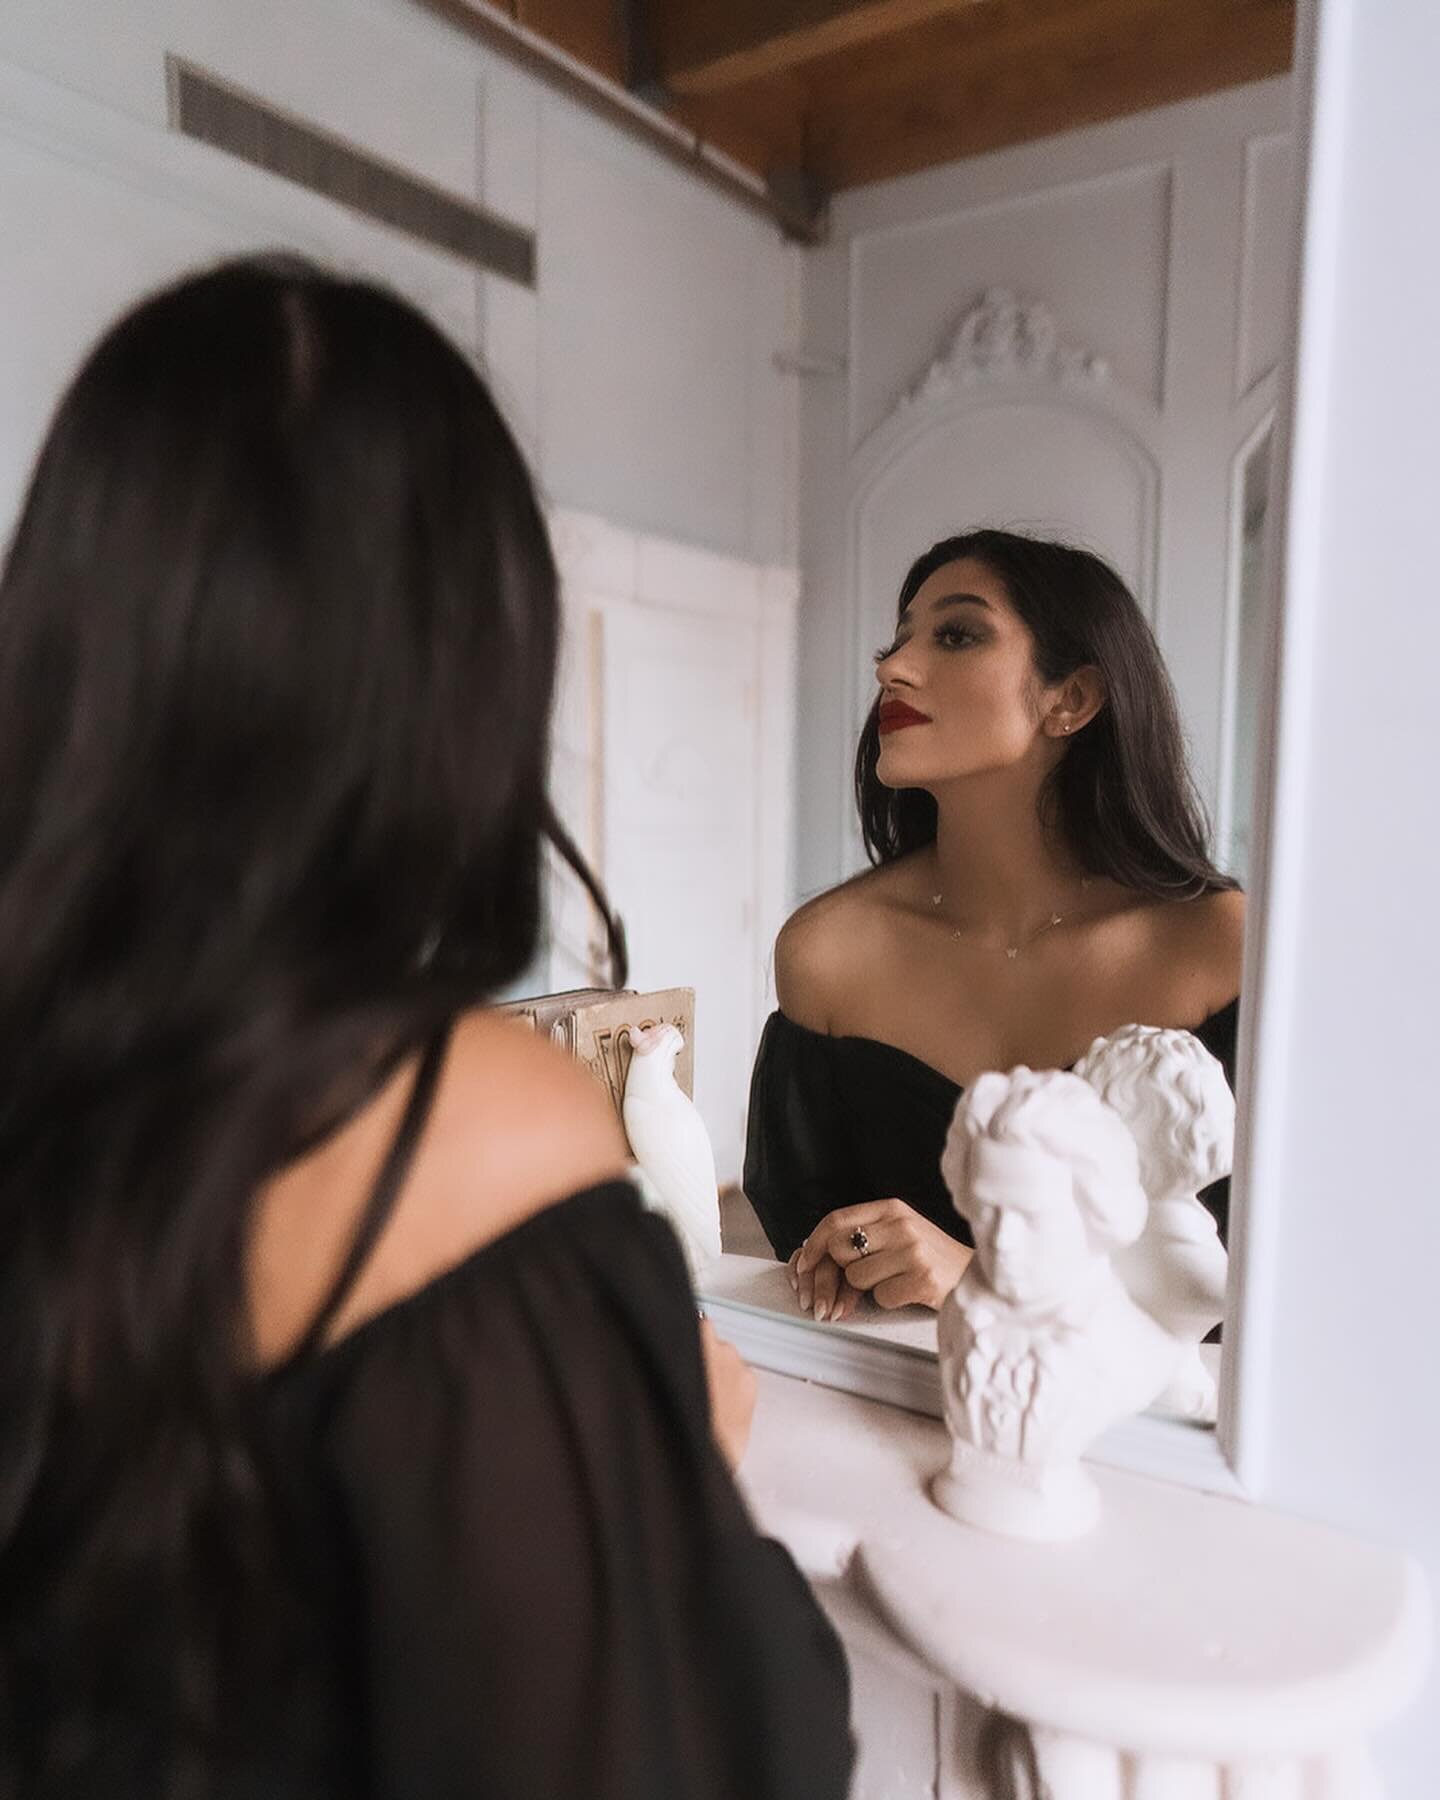 Ever look in the mirror and see a story waiting to be told? 

Yeah, we get that. Let&rsquo;s frame yours.

.
.
.
#portraitphotography #weddingphotographer #destinationweddingphotographer #engagementphotographer #dallastexas #southasianphotographer #s